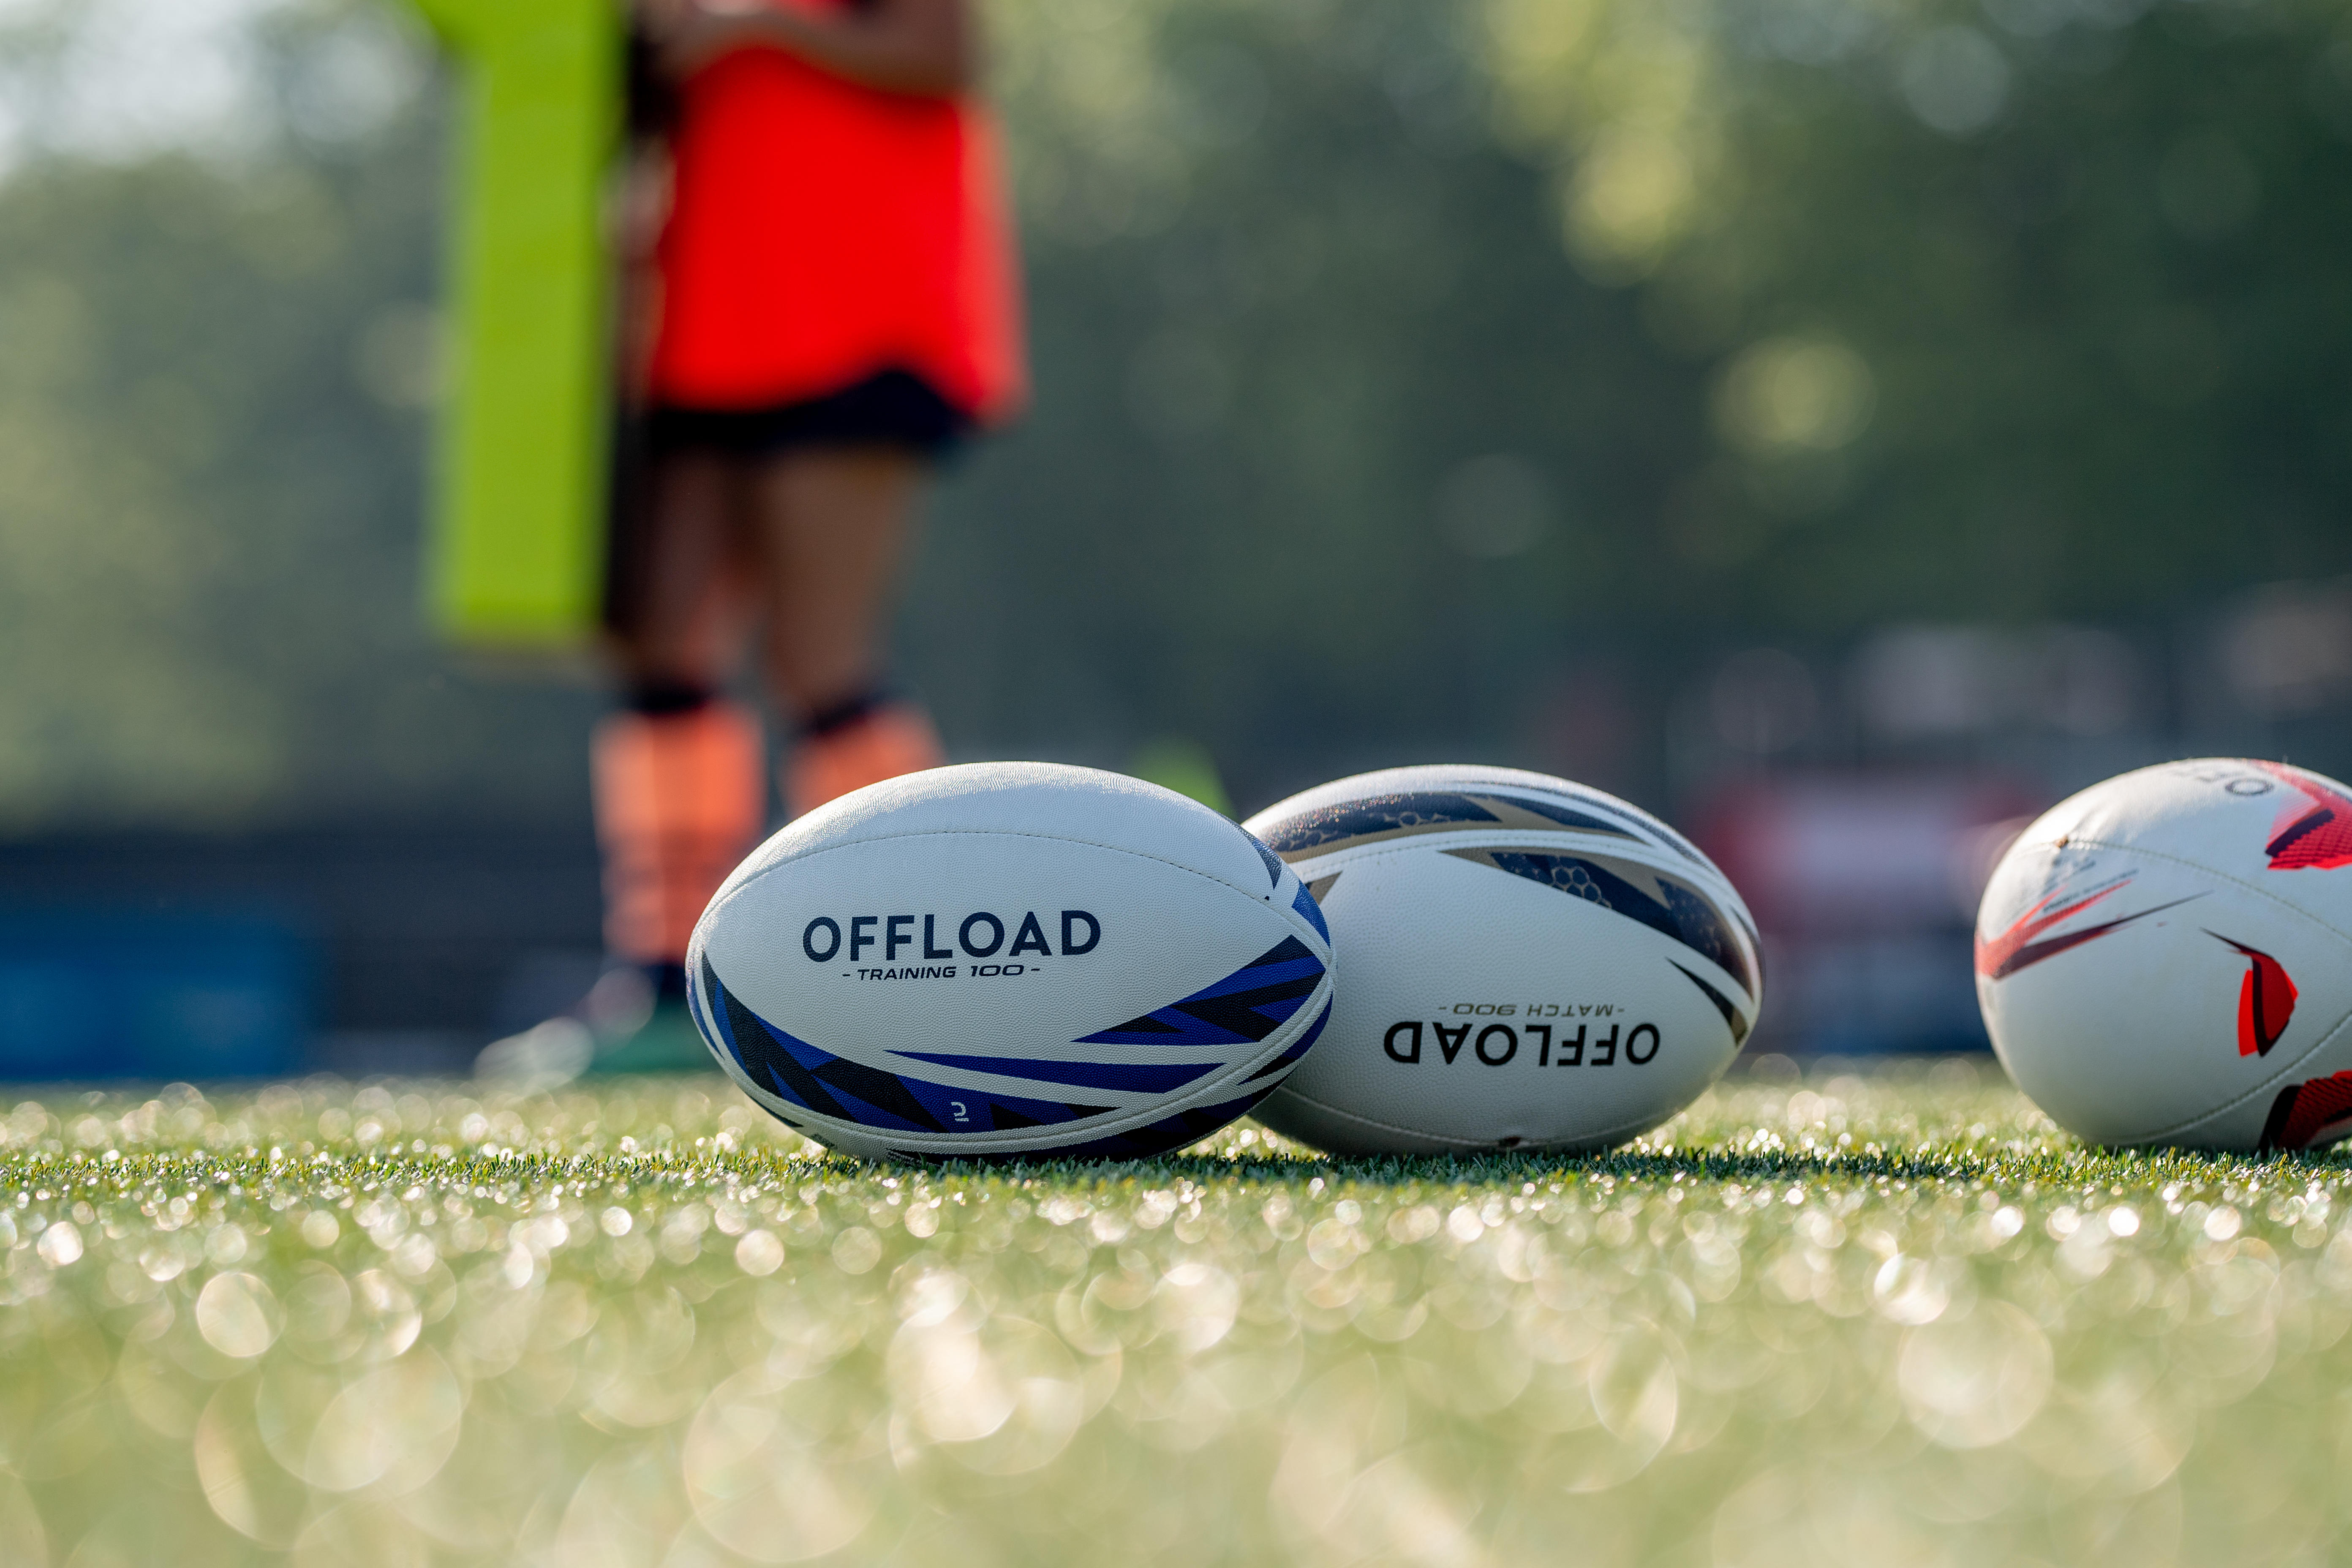 R100 rugby training ball size 5 - OFFLOAD